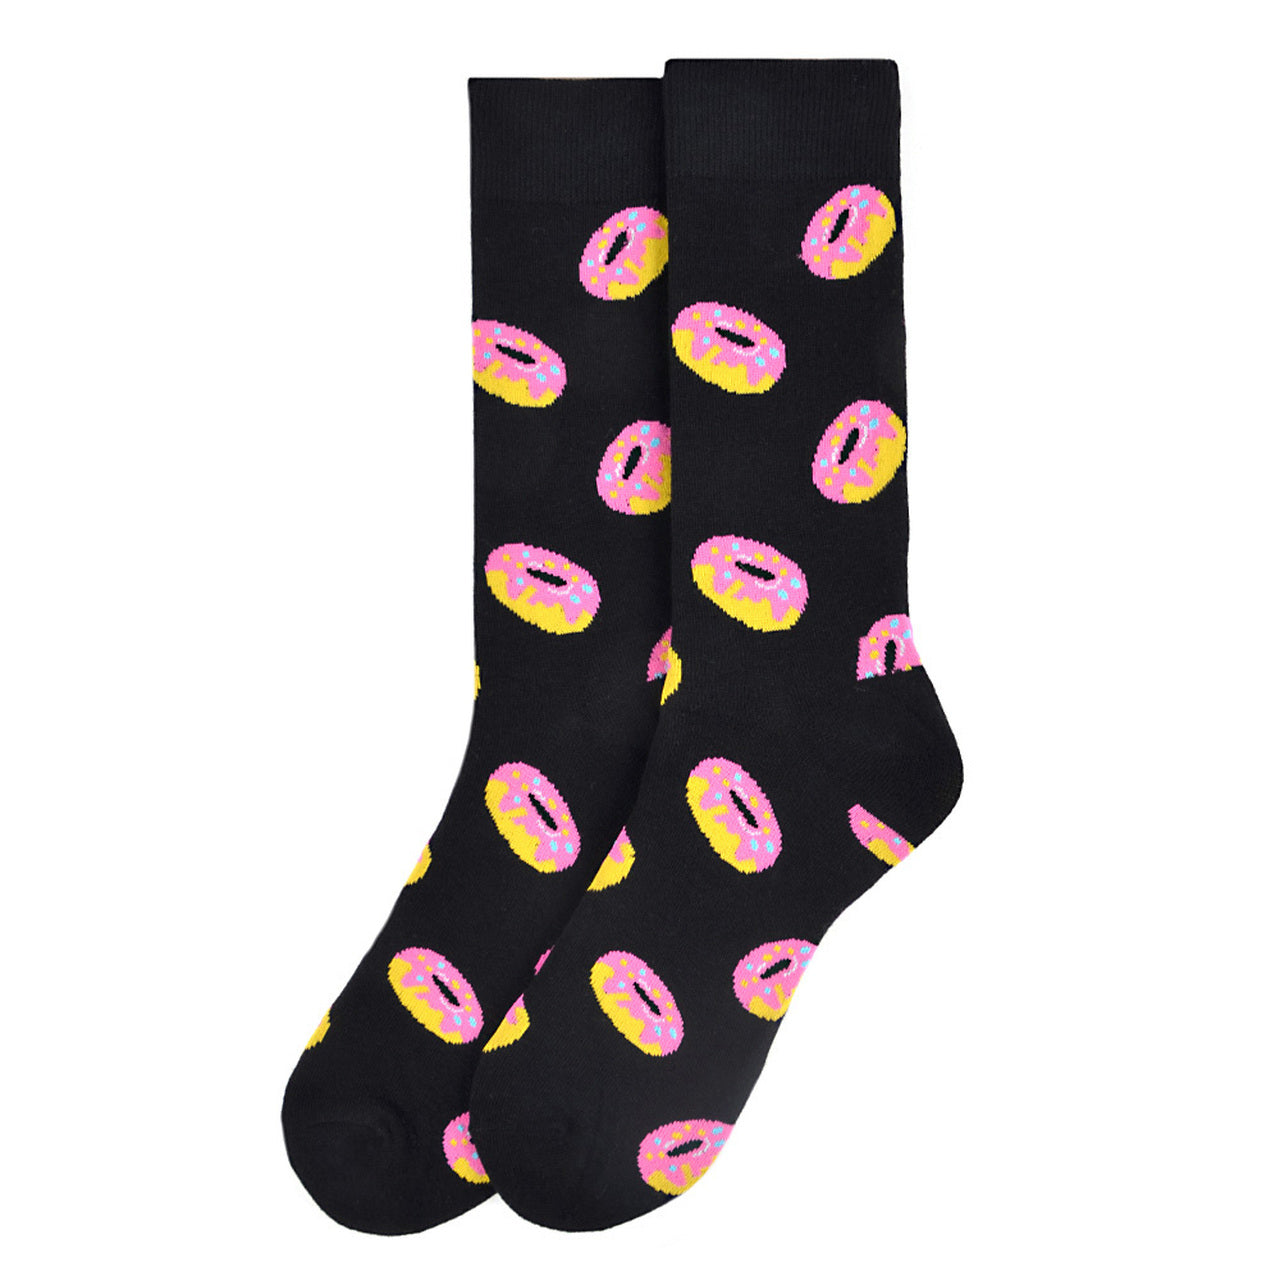 Fun Socks Men's Doughnut Novelty Socks Black and Pink Donut Lovers Bakery Pastries Donuts Gift for Dad